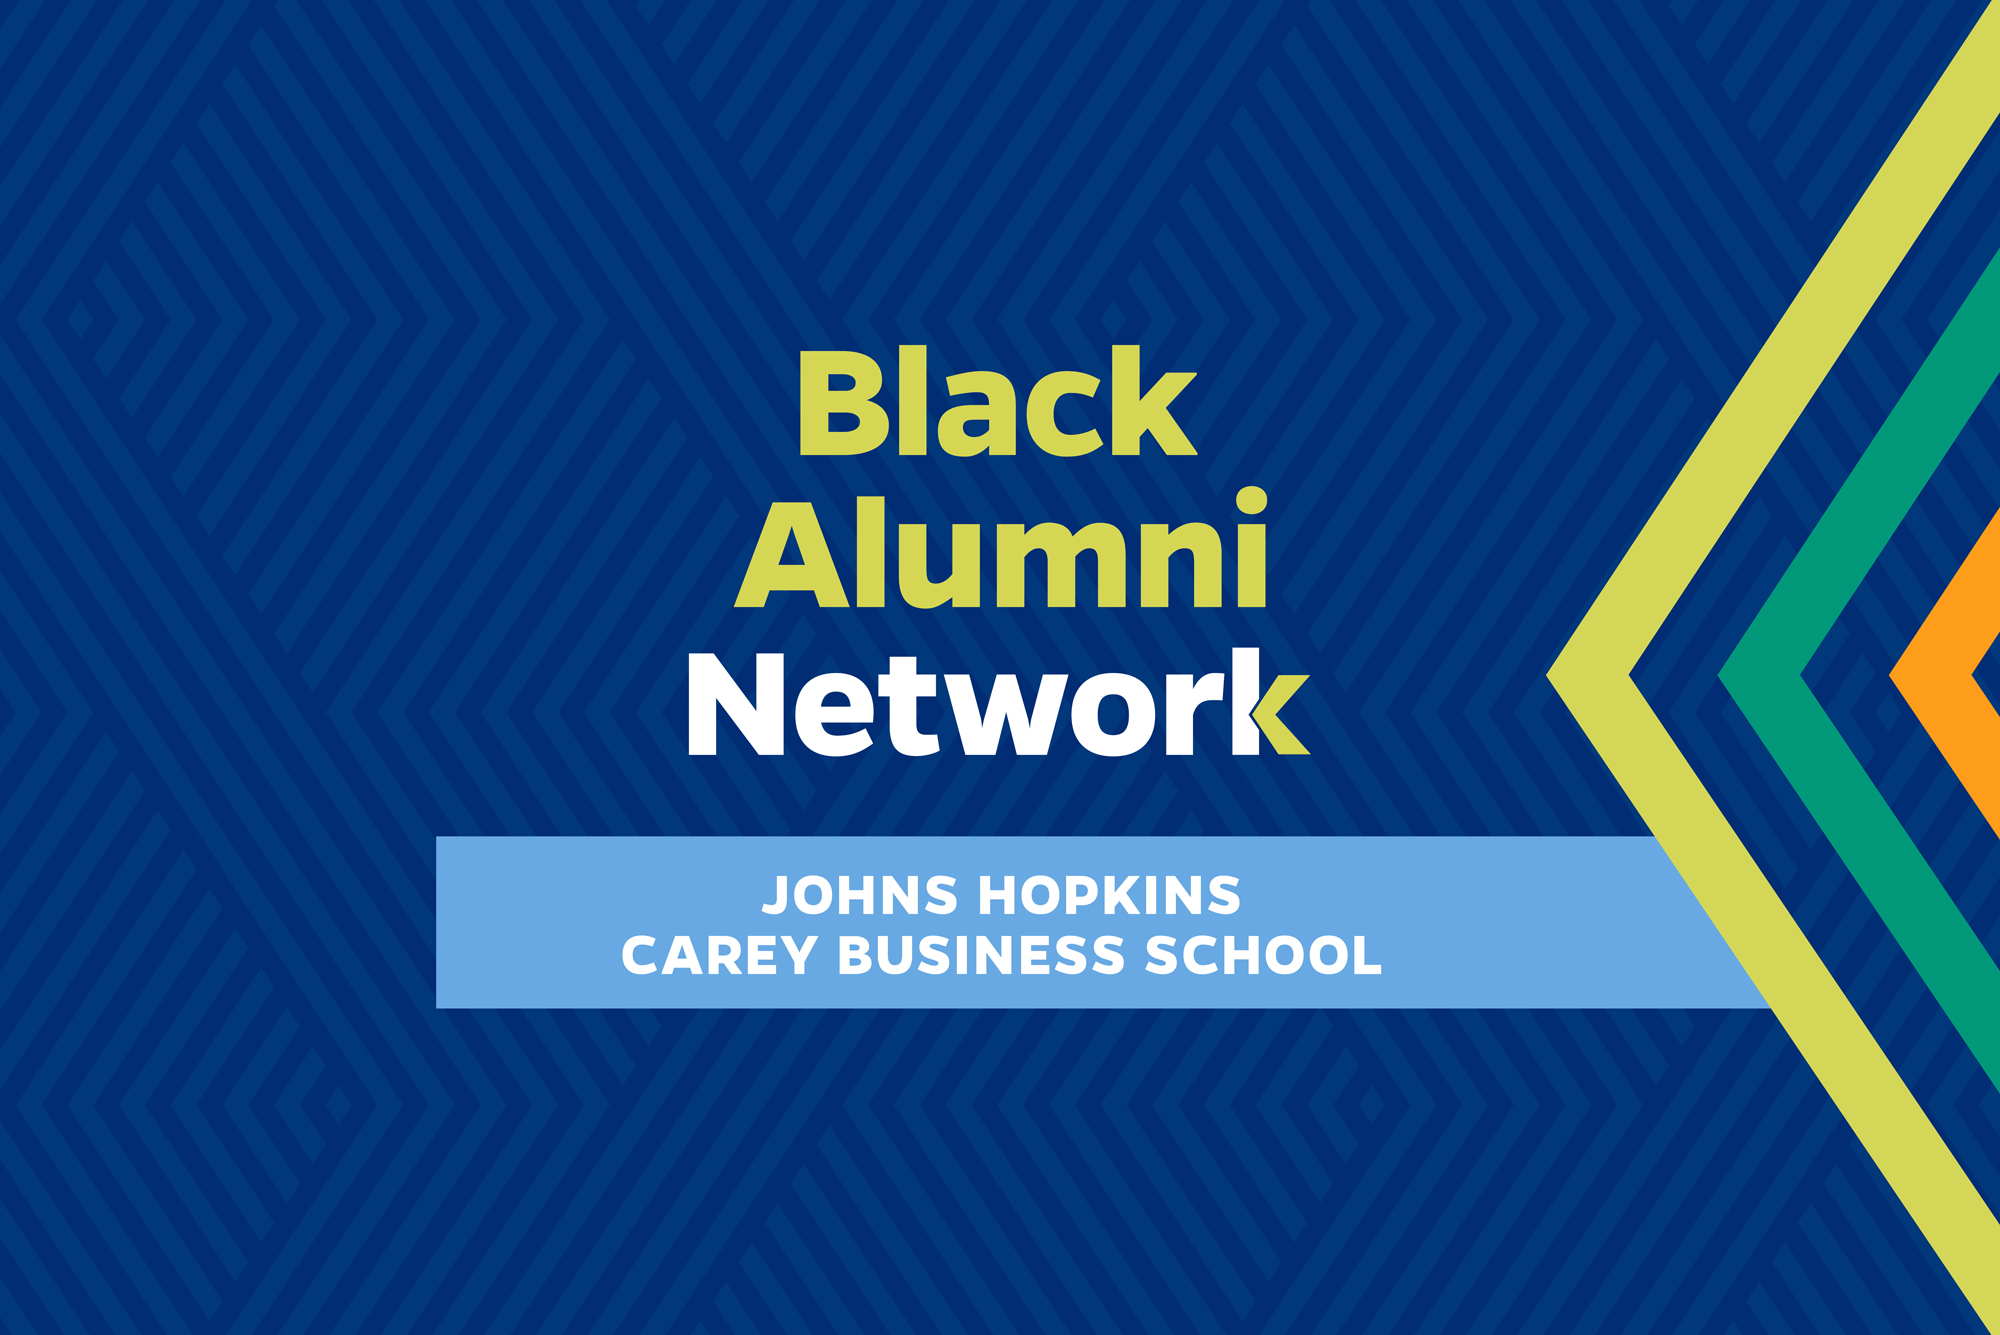 Carey Business School: Black Alumni Network Fireside Chat with Dr. Lawrence Drake